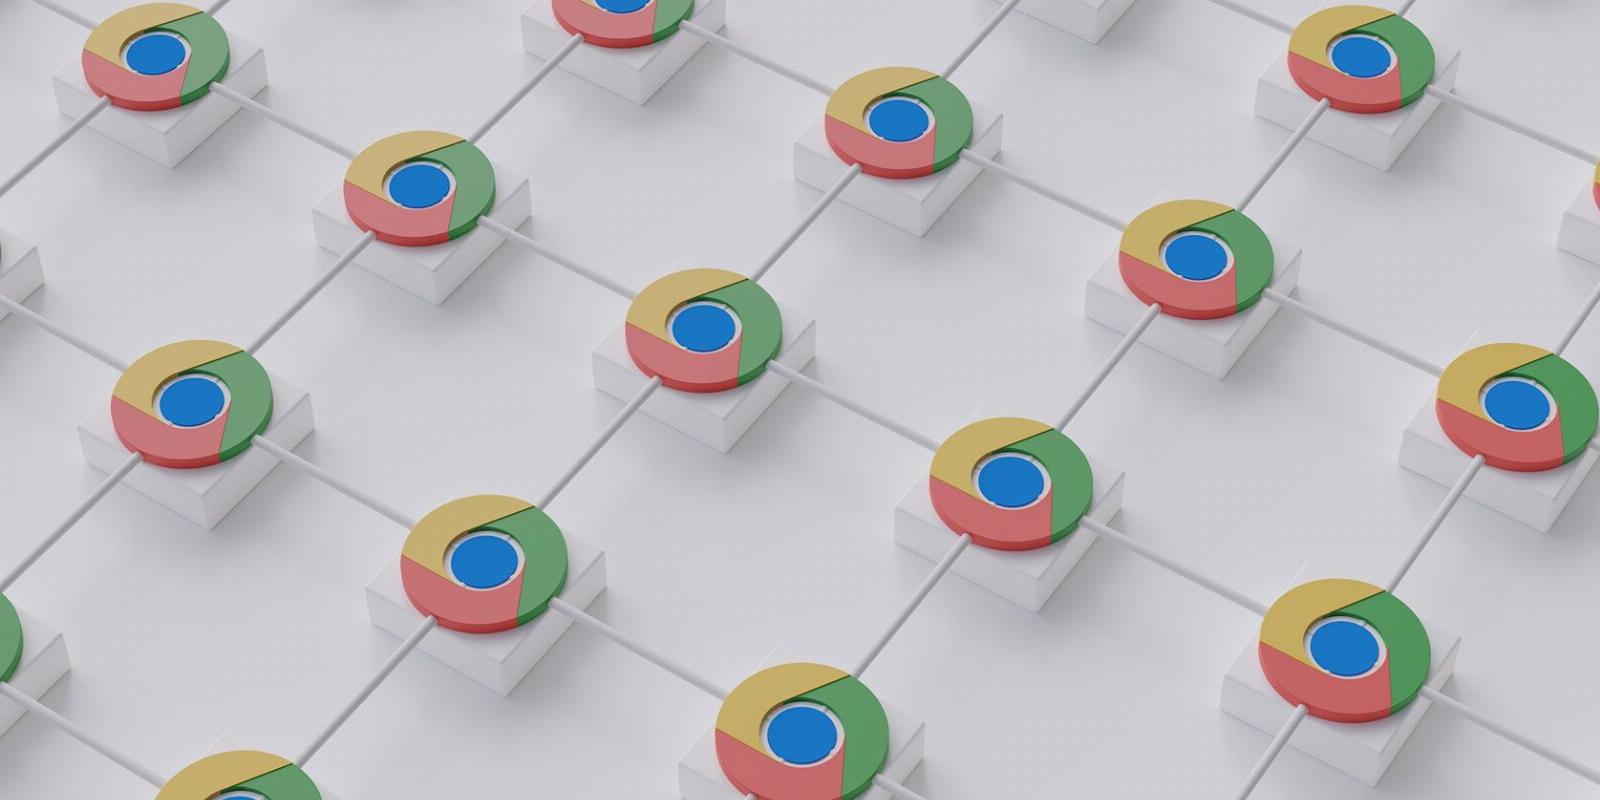 How to See Your Most Visited Sites on Chrome